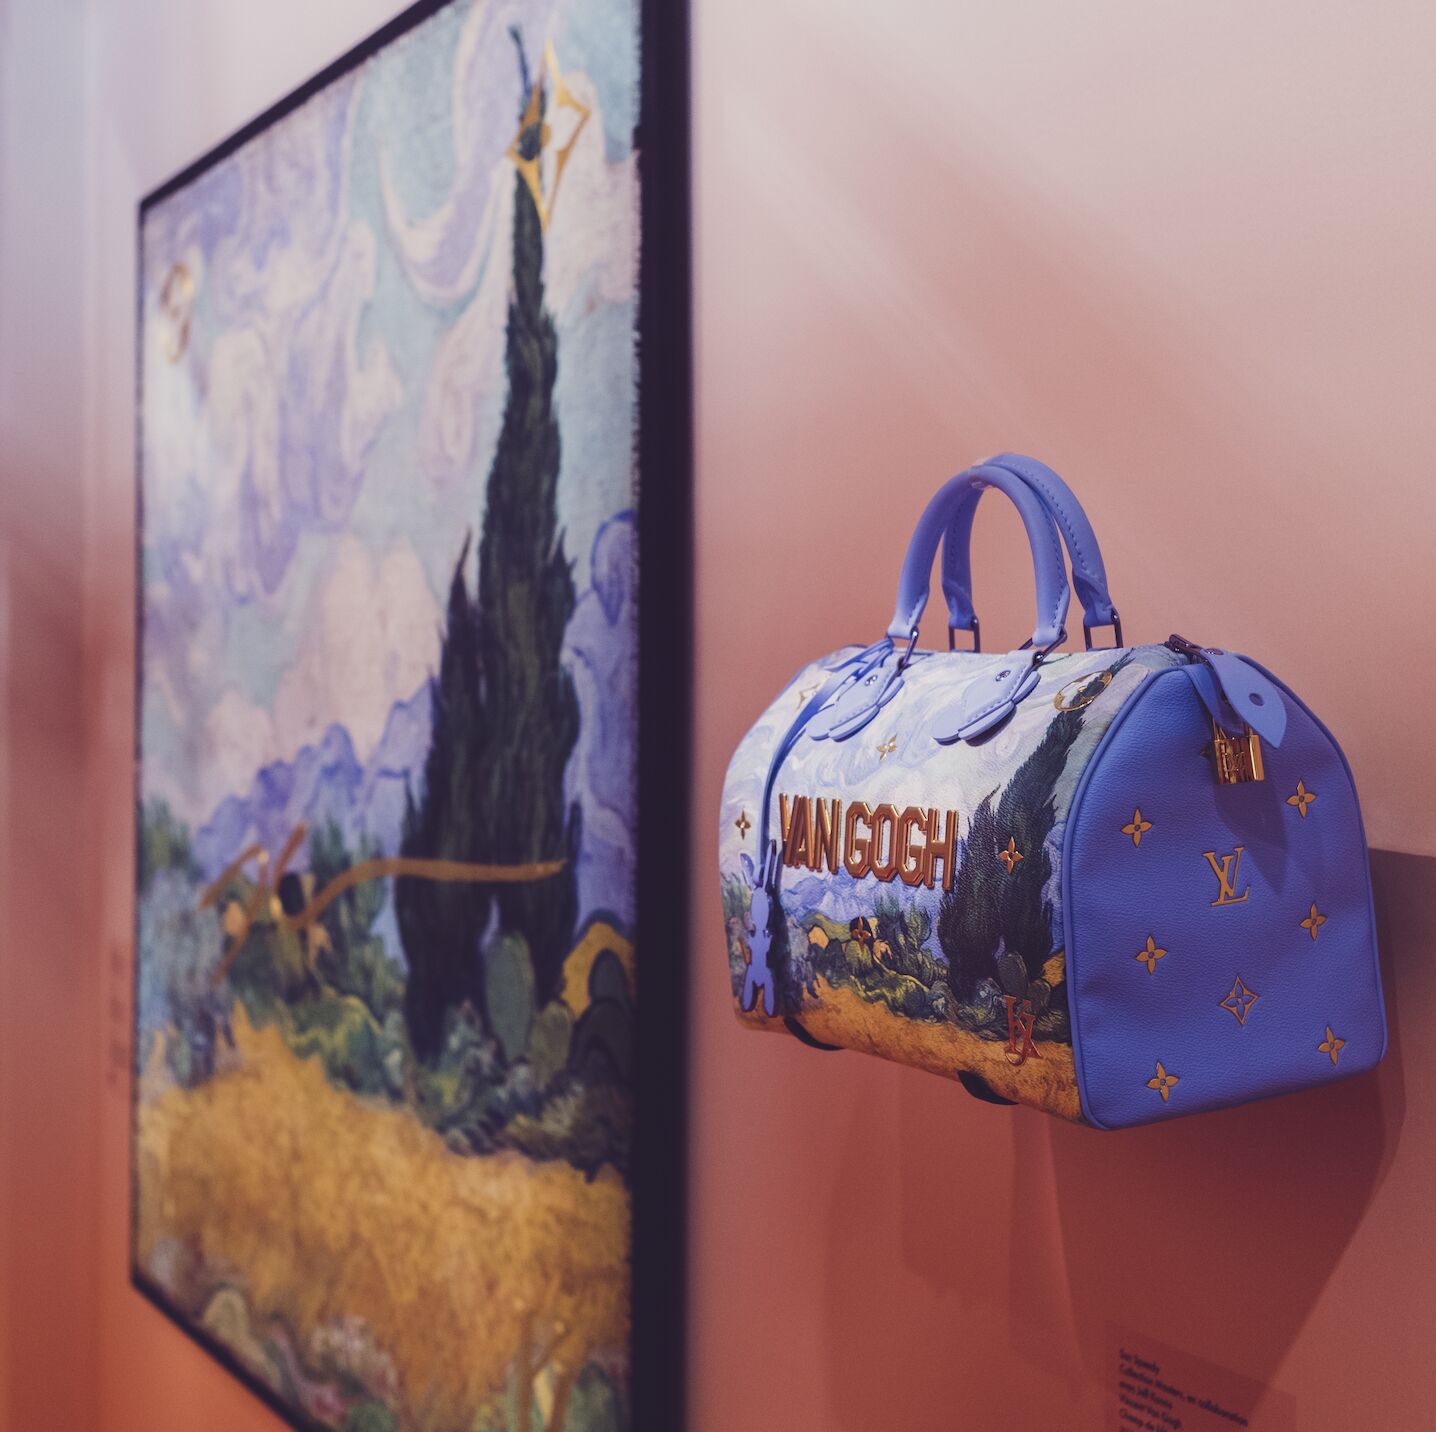 A look back at Louis Vuitton's best art collaborations, including Murakami